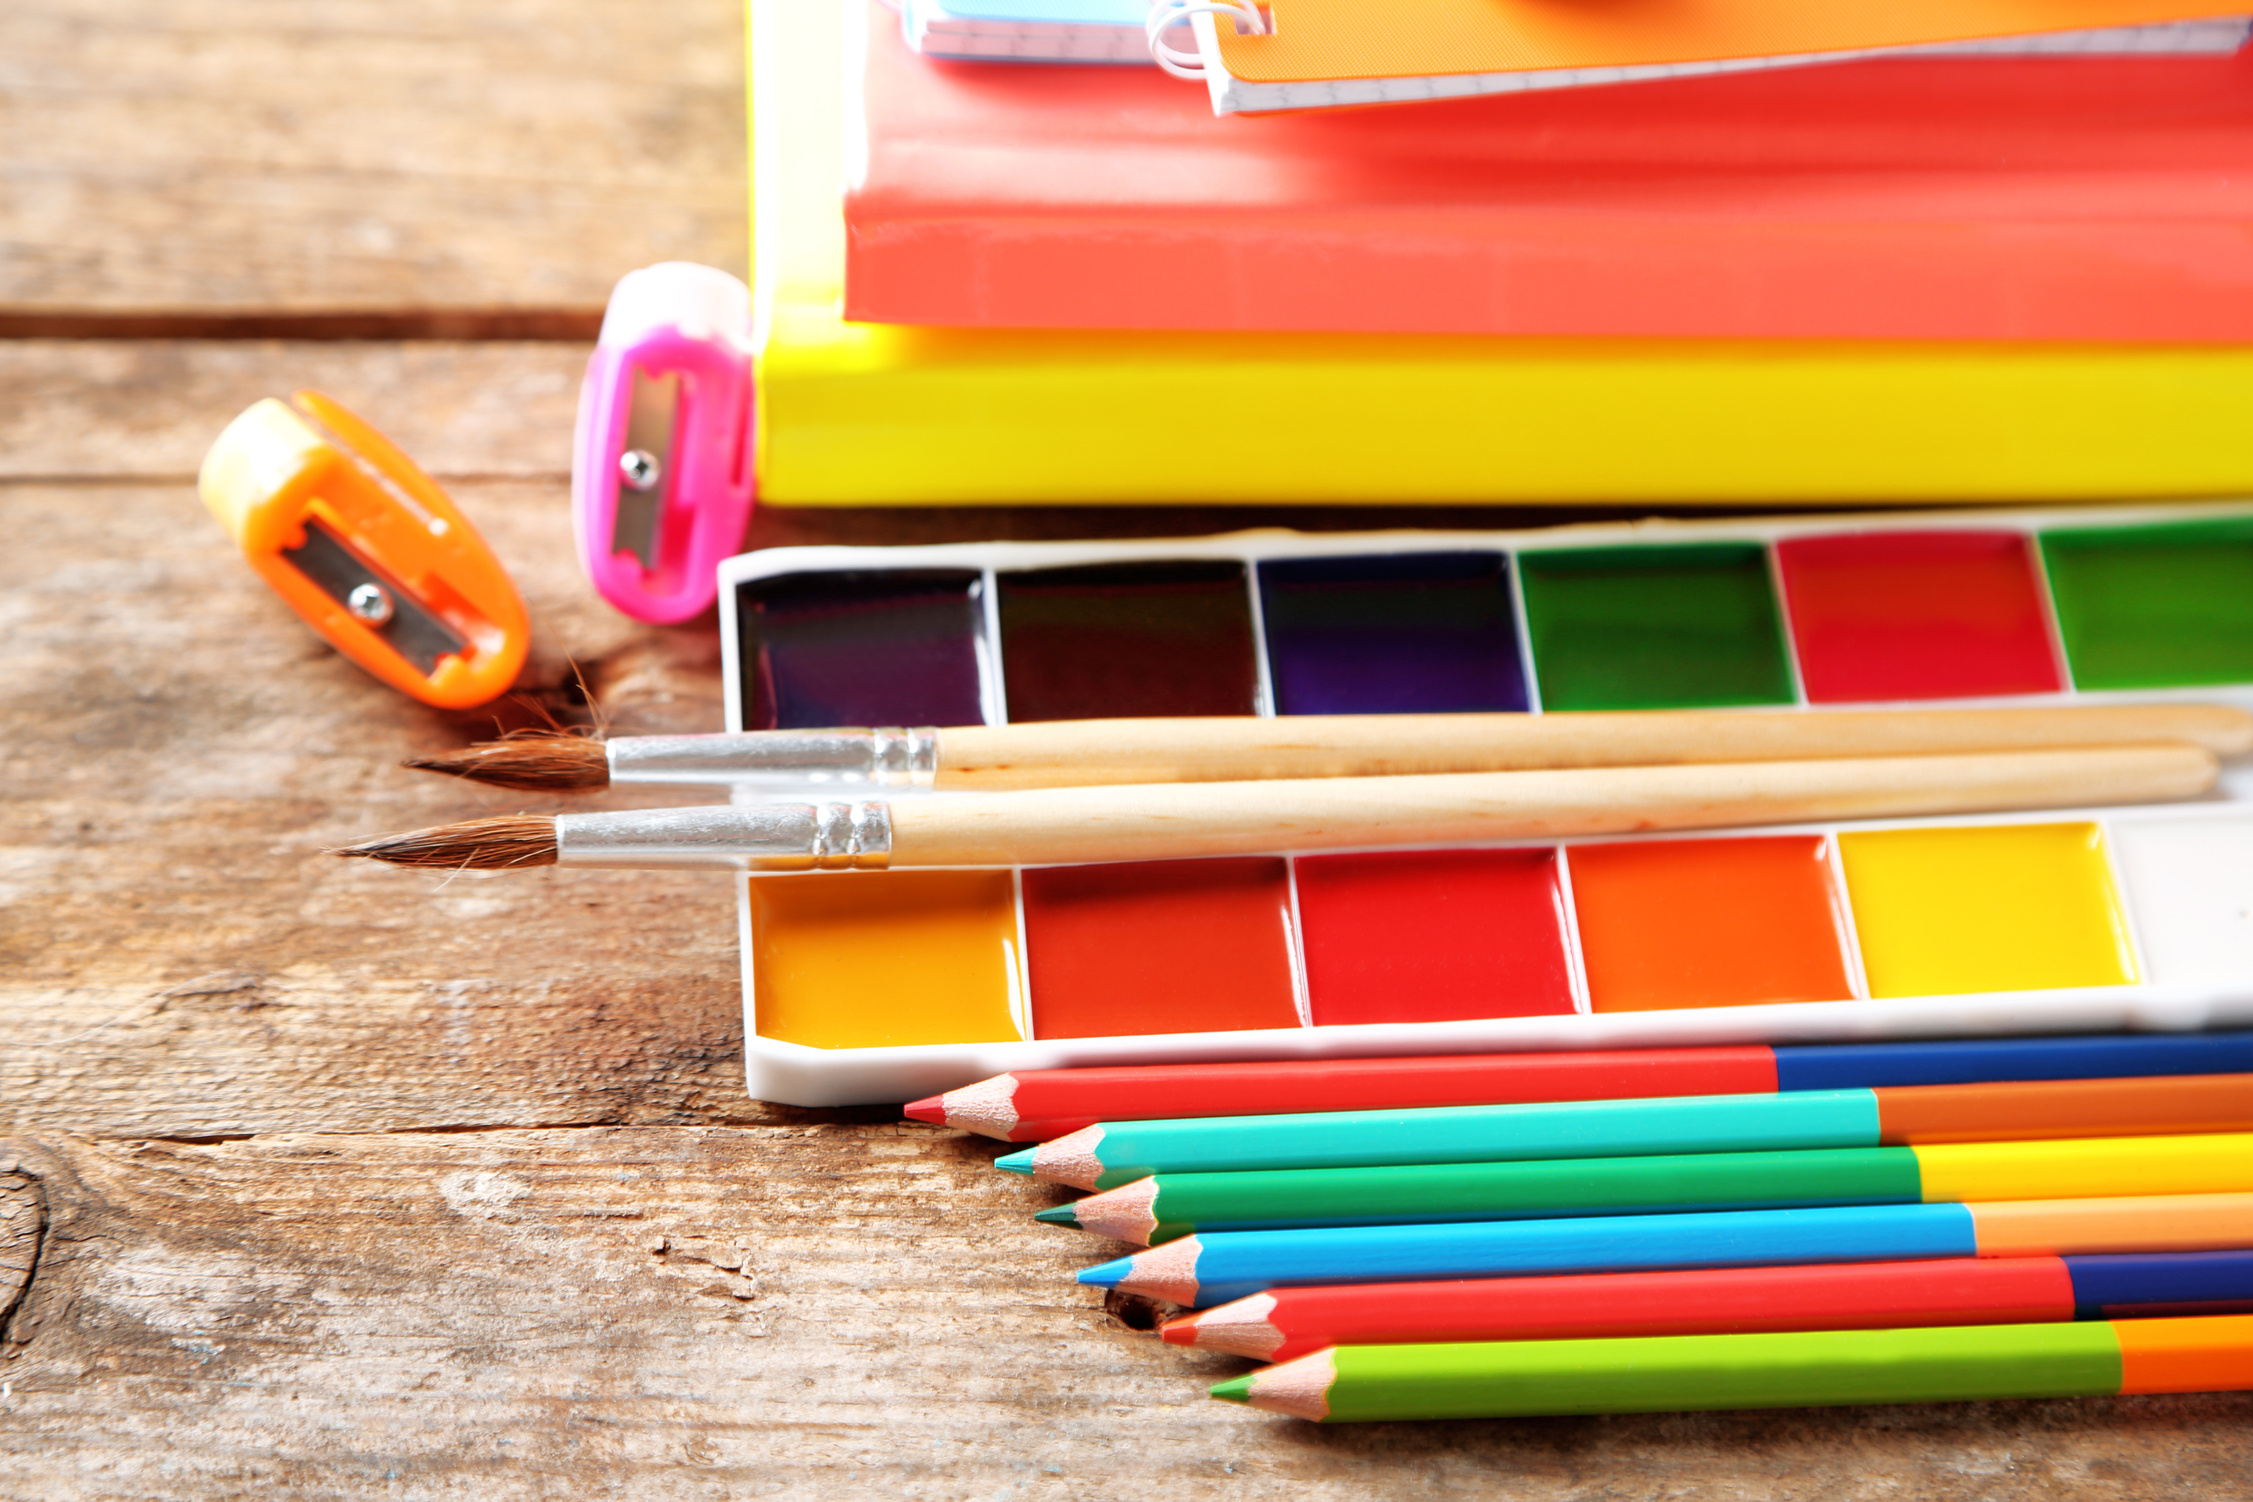 Multi-Colored School Stationery and Art Supplies on Old Wooden Table